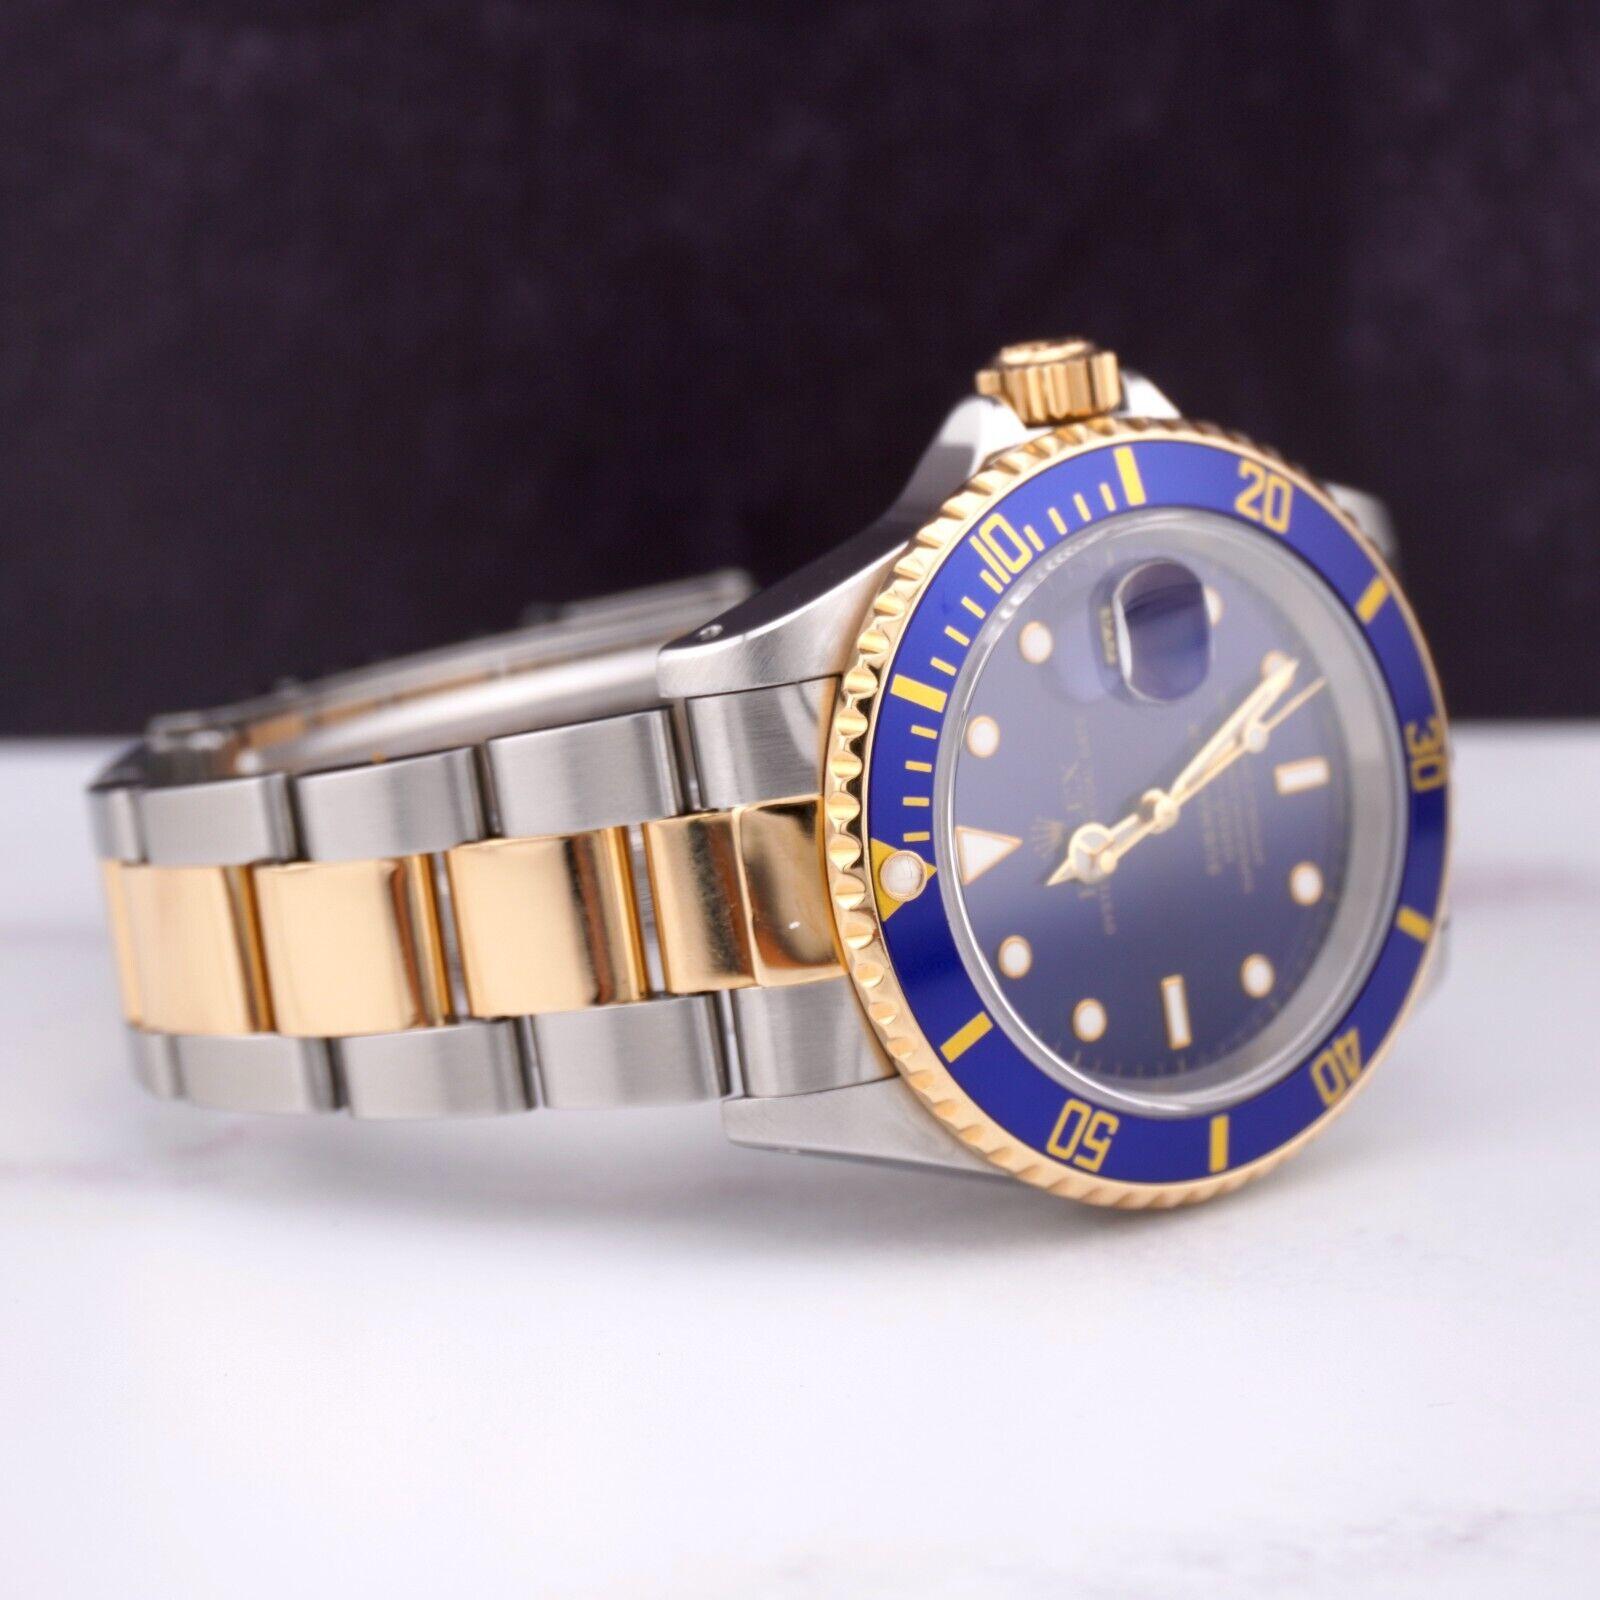 Rolex Submariner 40mm Watch. A Pre-owned watch w/ Original Box and 1998 Papers. Watch is 100% Authentic and Comes with Authenticity Card. Watch Reference is 16613 and is in Excellent Condition (See Pictures). The dial color is Blue and material is